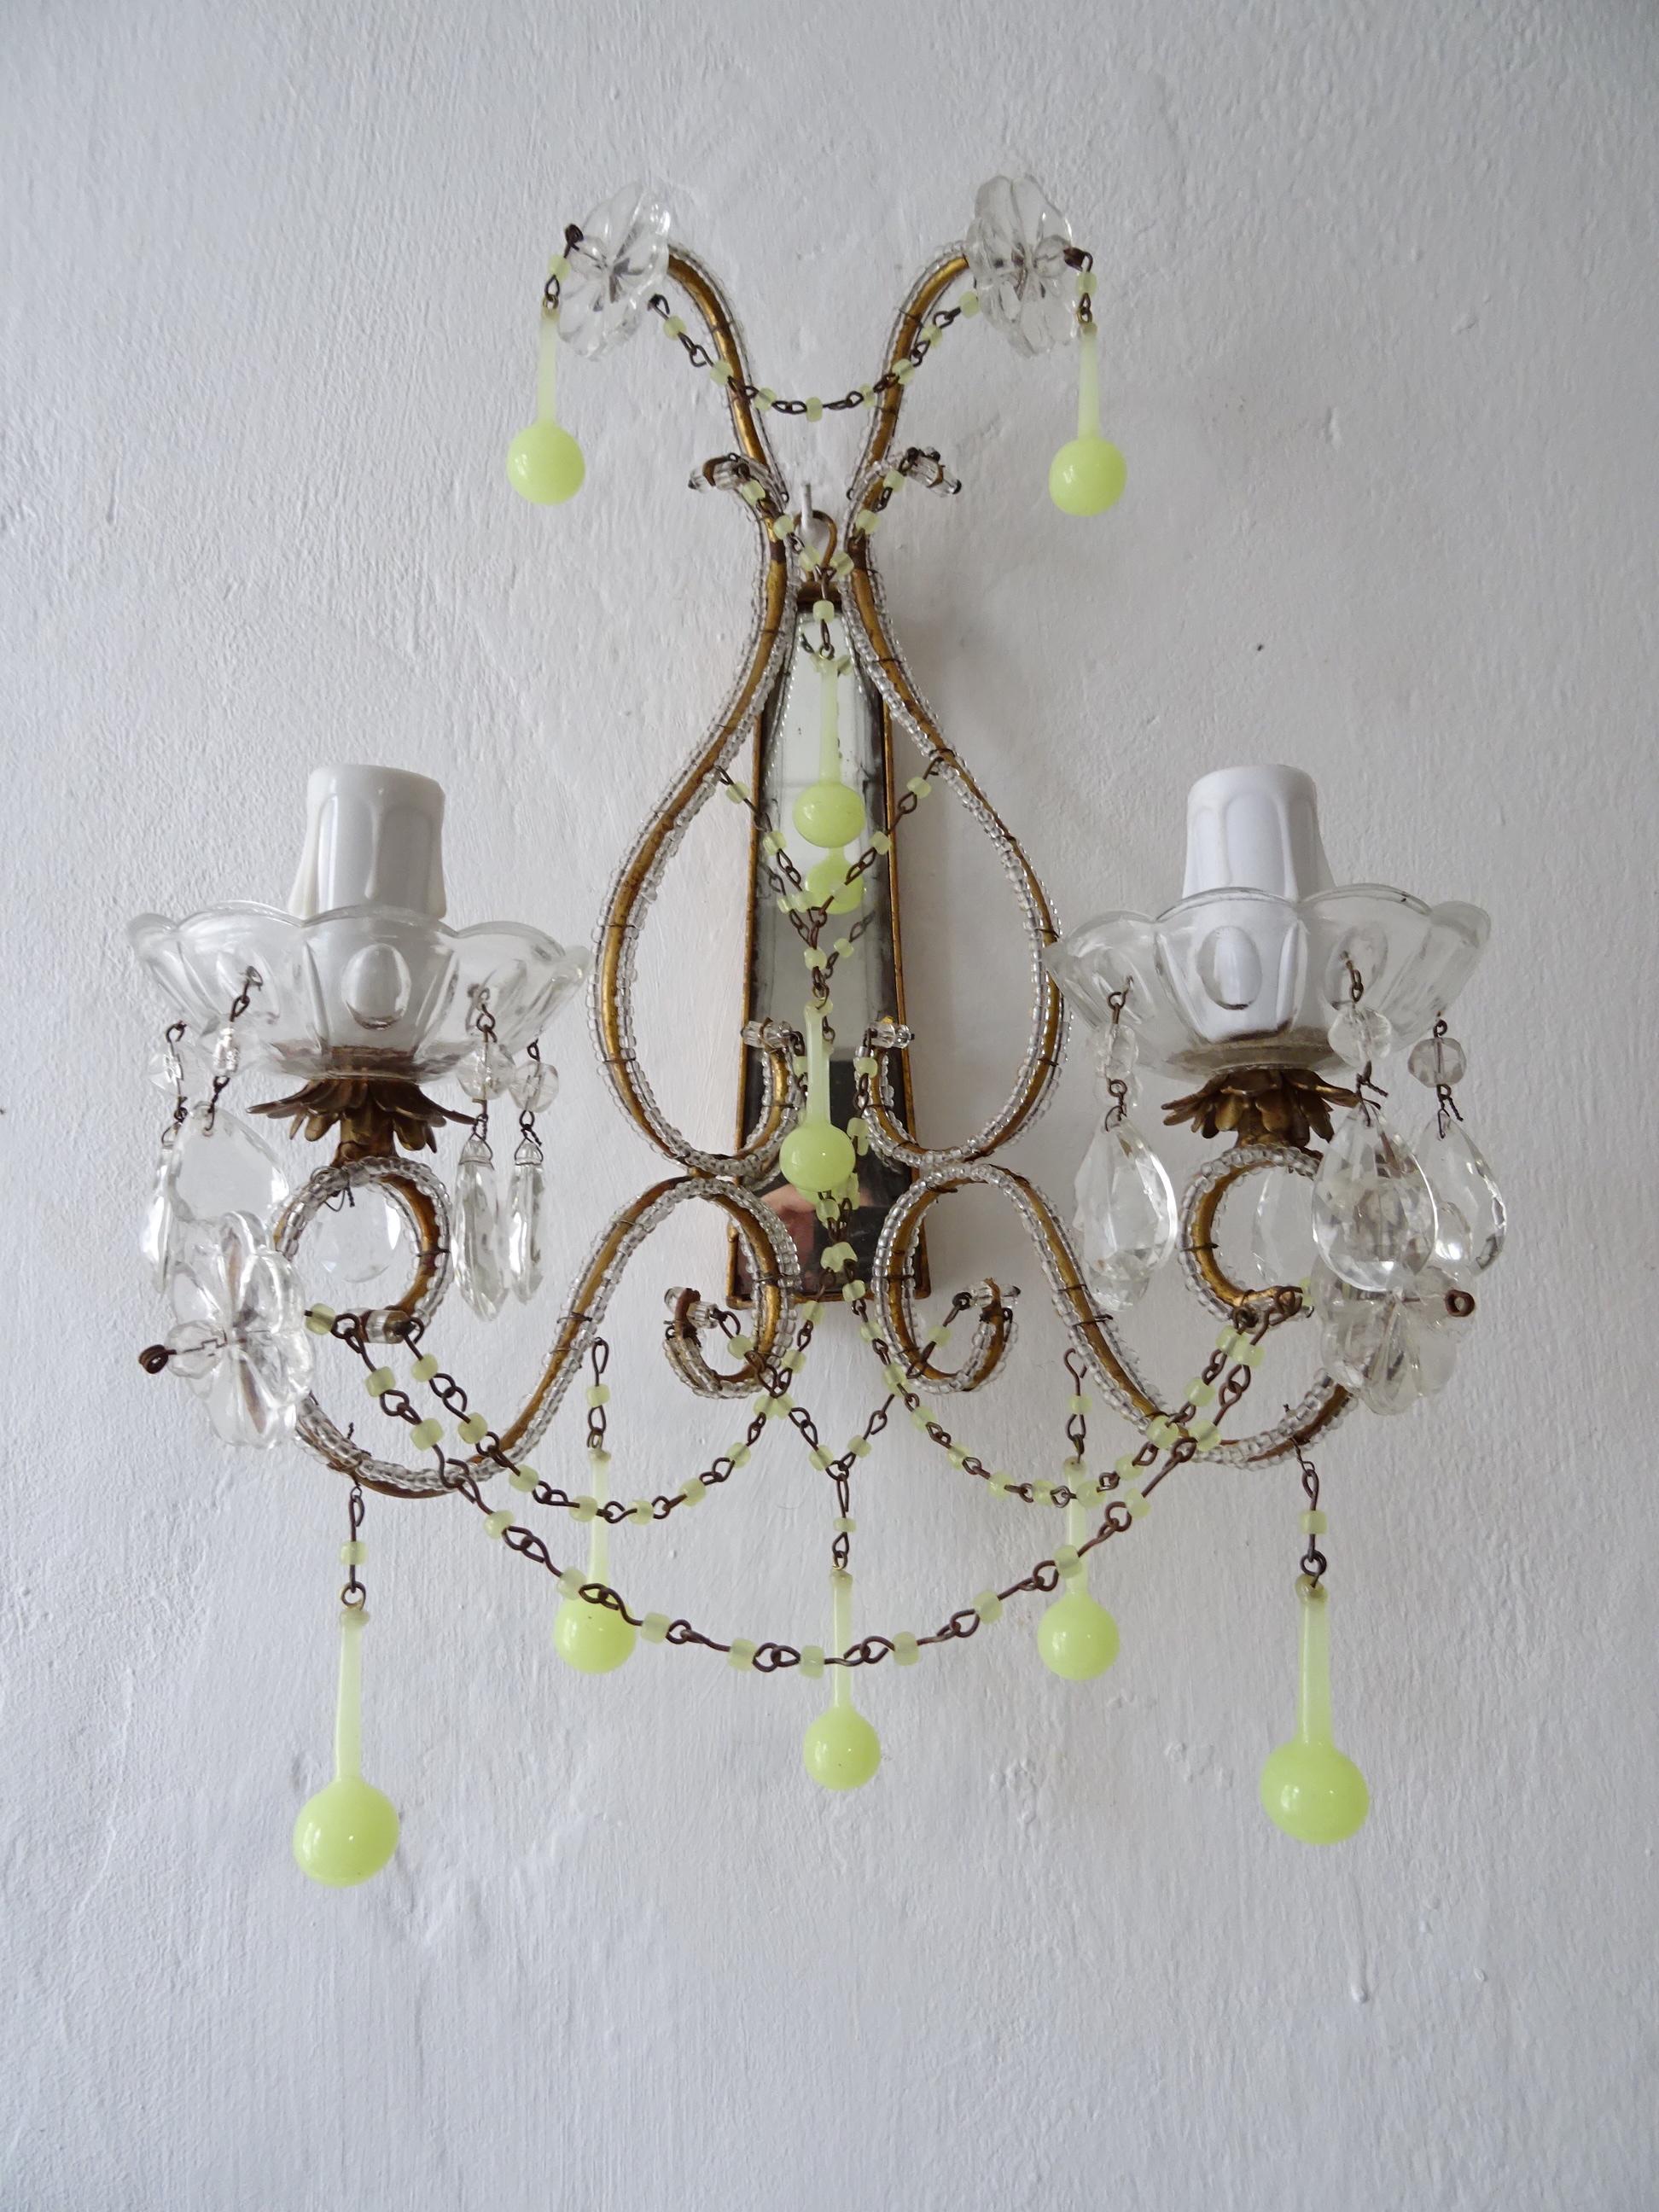 Crystal 1930 French Yellow Opaline Drops Beaded Murano Mirrors Beaded Swags Sconces For Sale